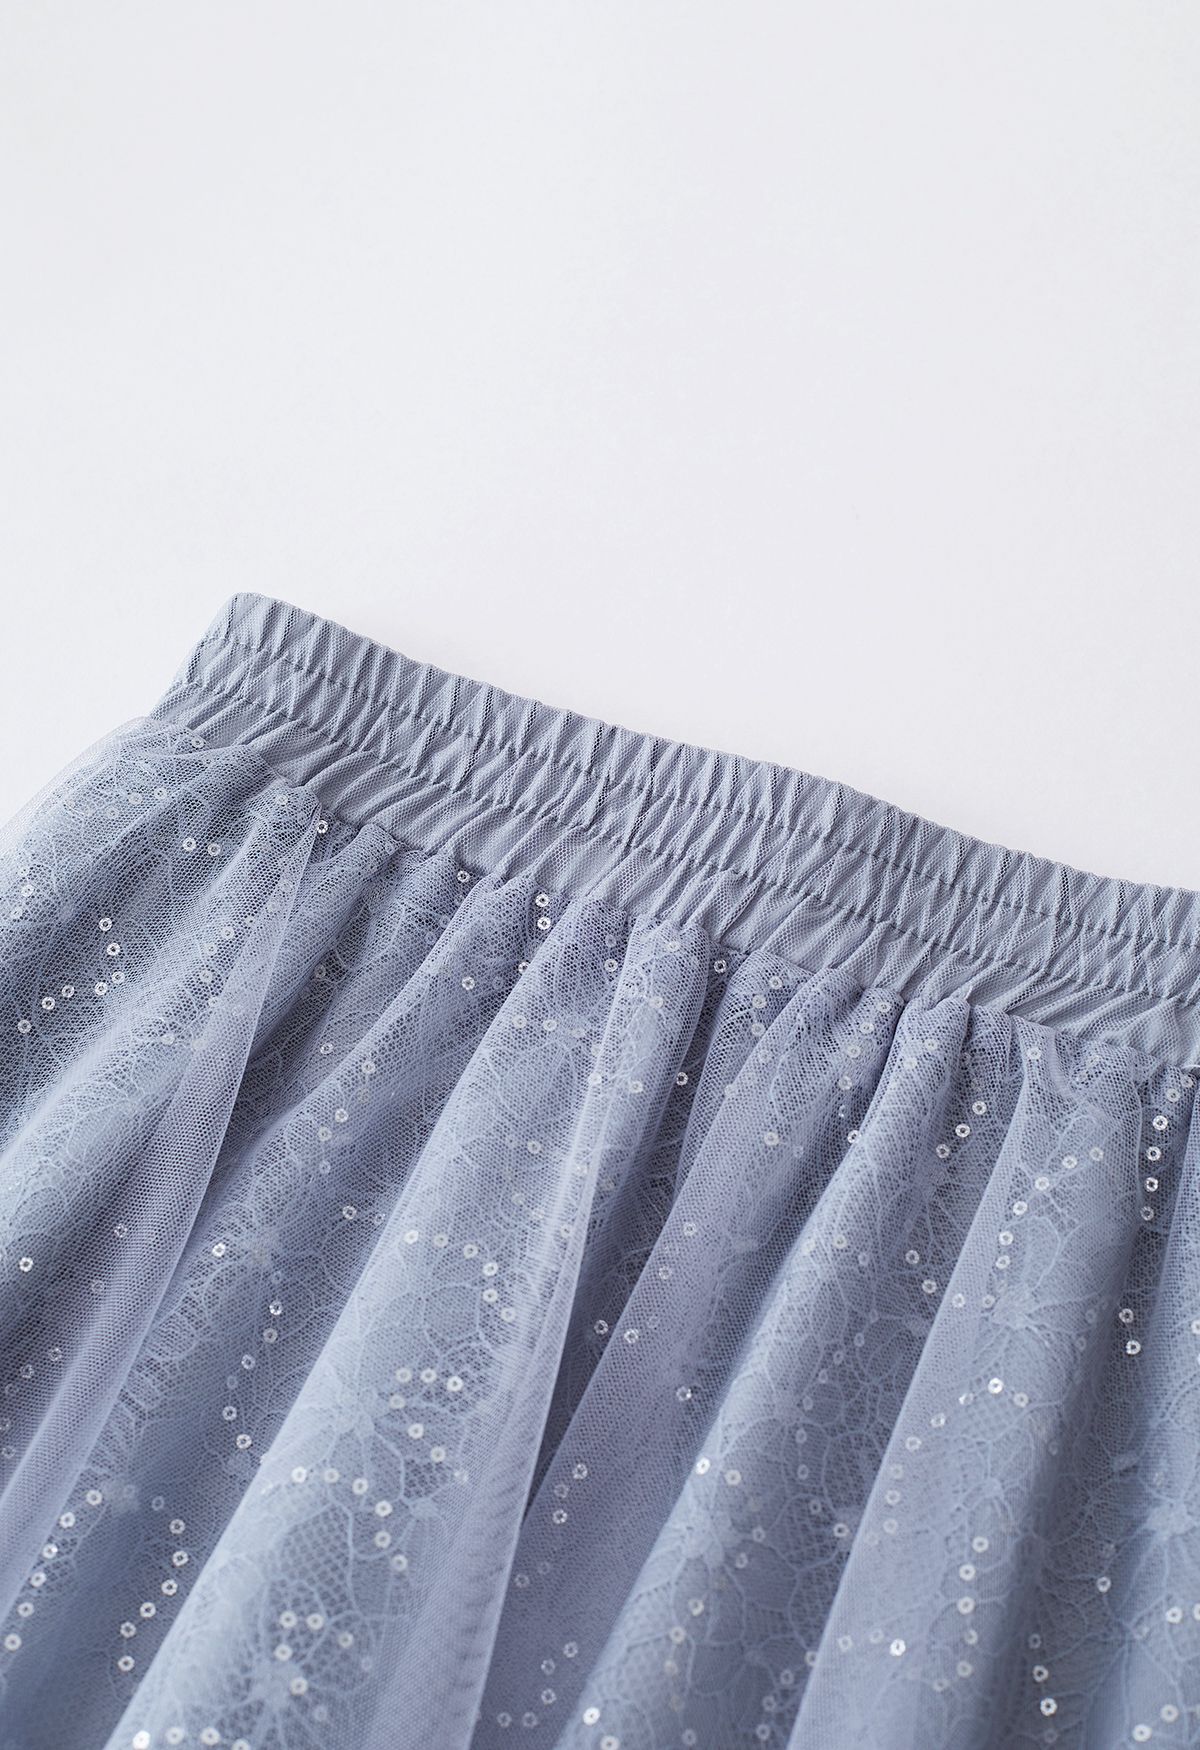 Sequined Floral Lace Mesh Tulle Skirt in Grey